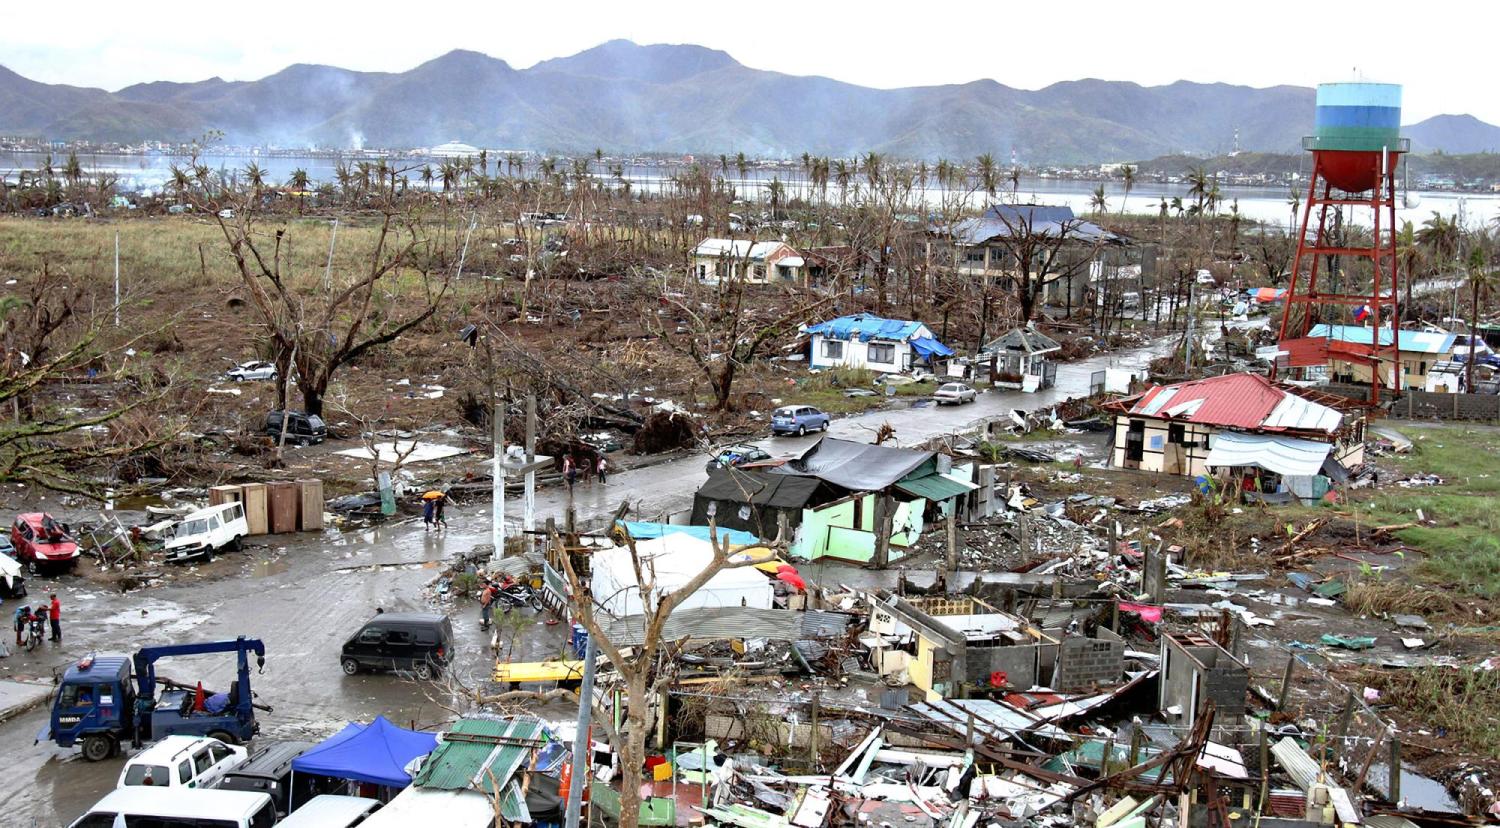 Destruction and damage by Typhoon Haiyan November 23, 2013 in Tacloban, Philippines.